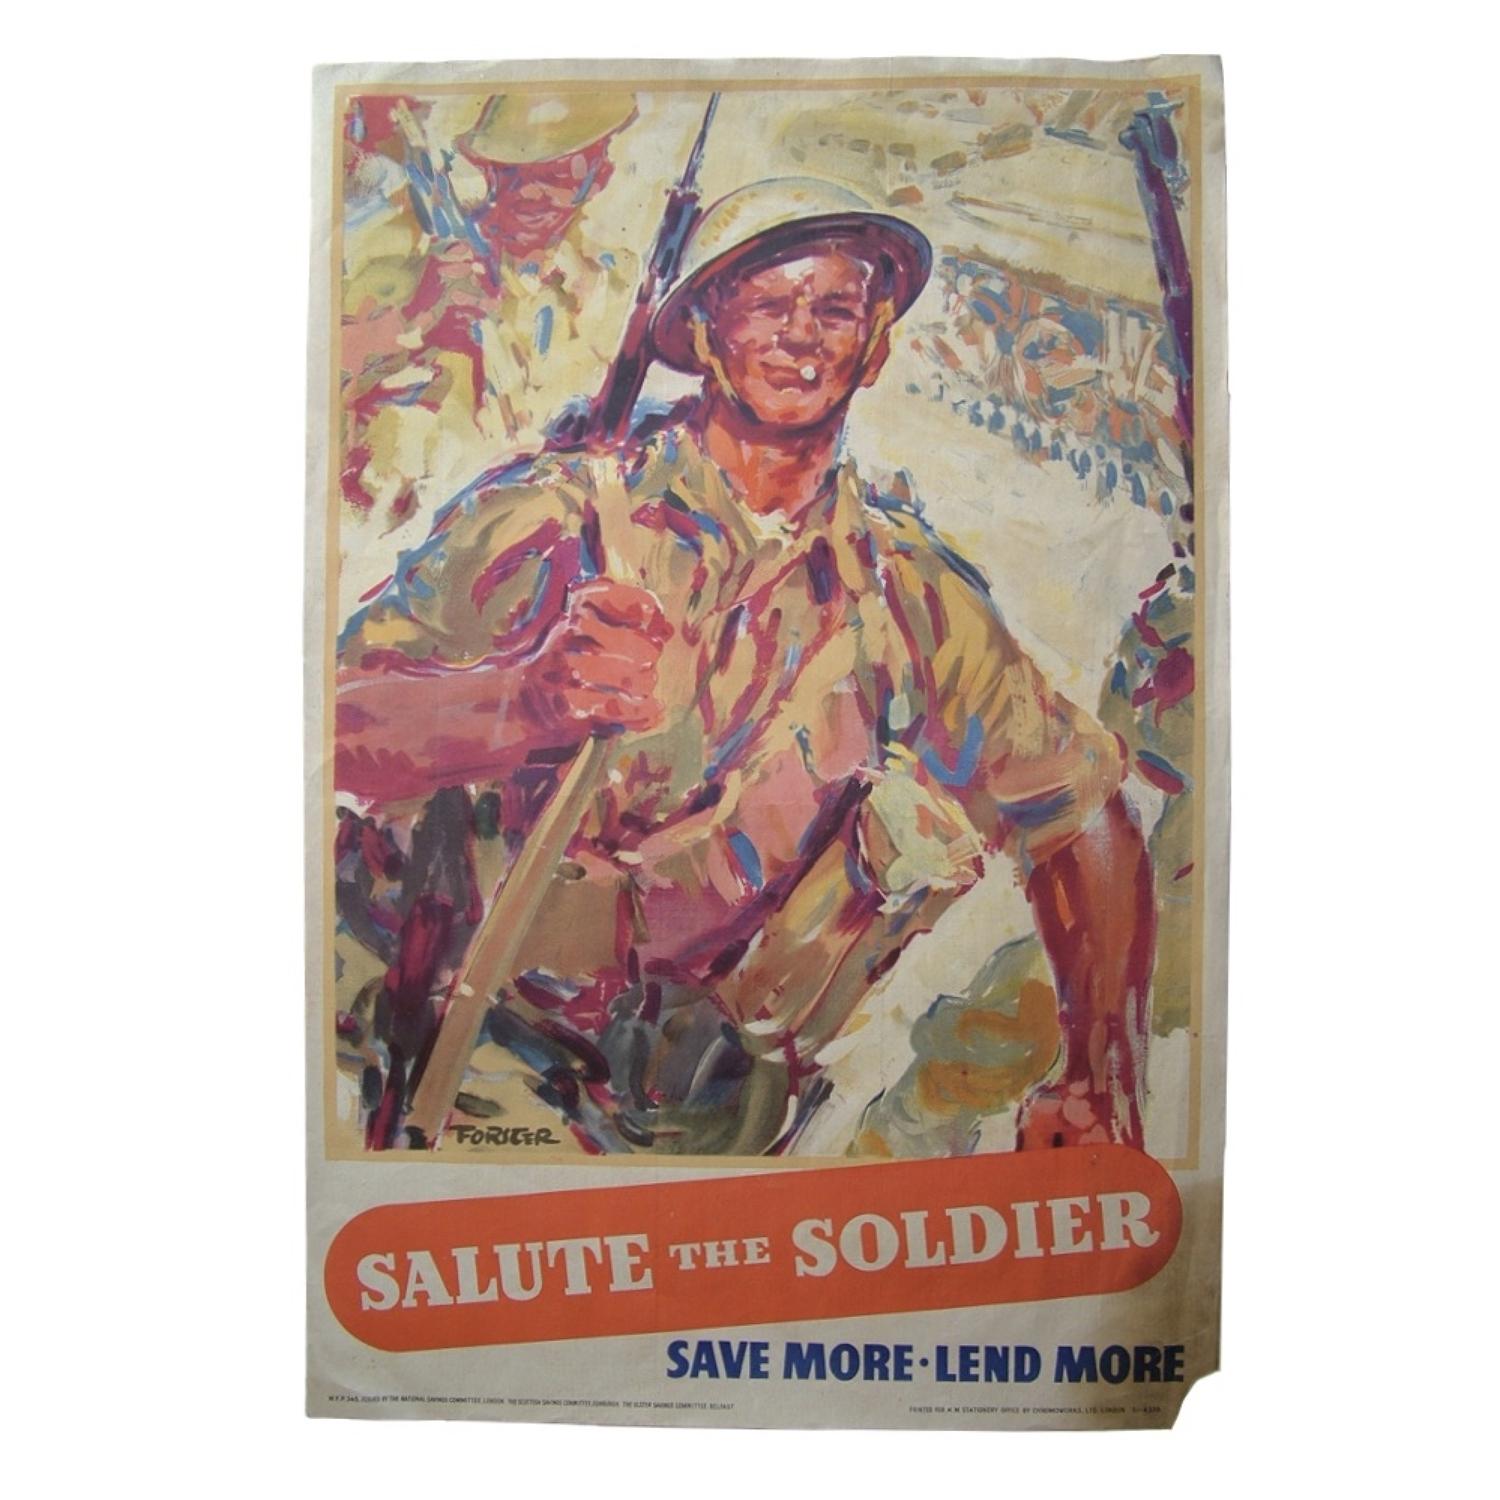 Salute the Soldier poster